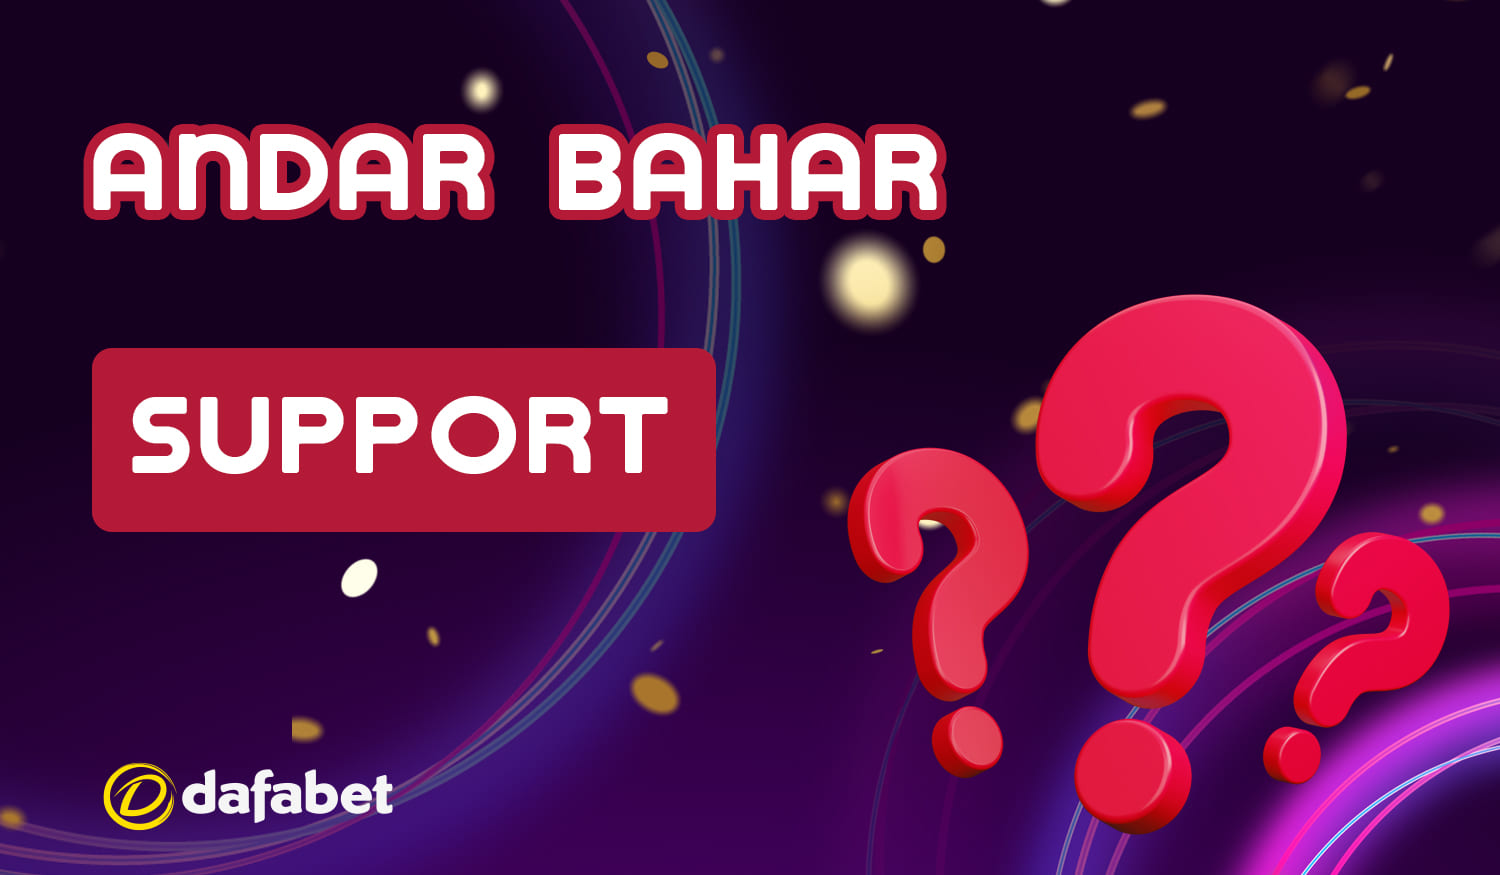 How to contact Dafabet's customer service while playing Andar Bahabet